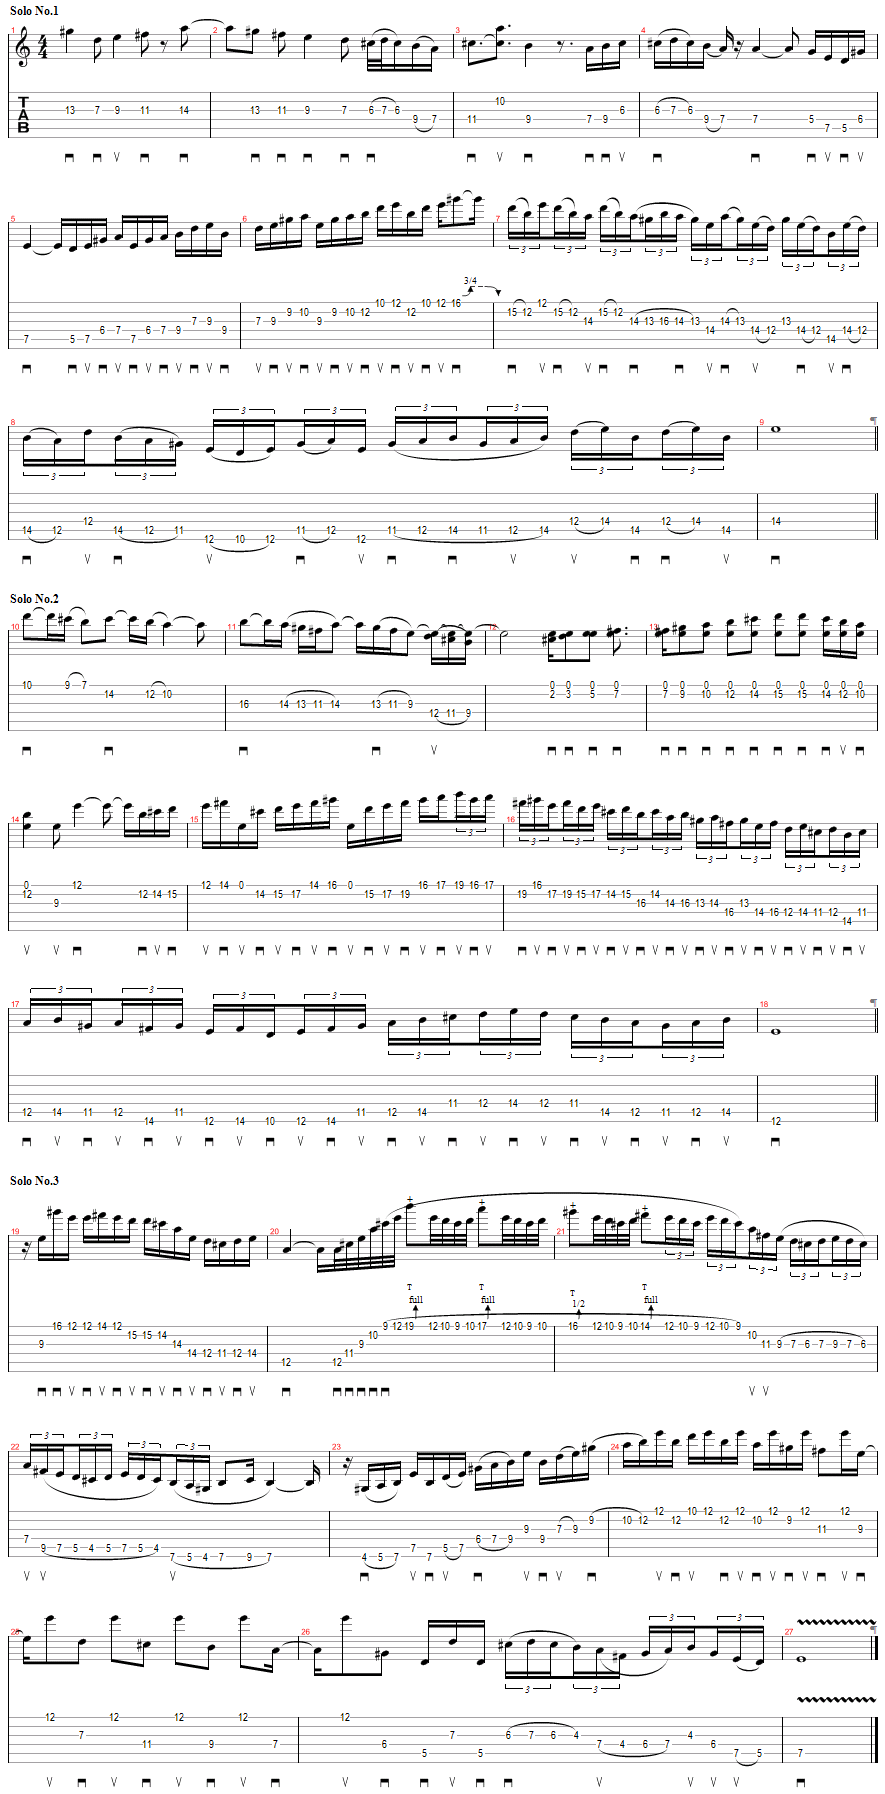 Tablature for Improving Your Phrasing - Backing Track